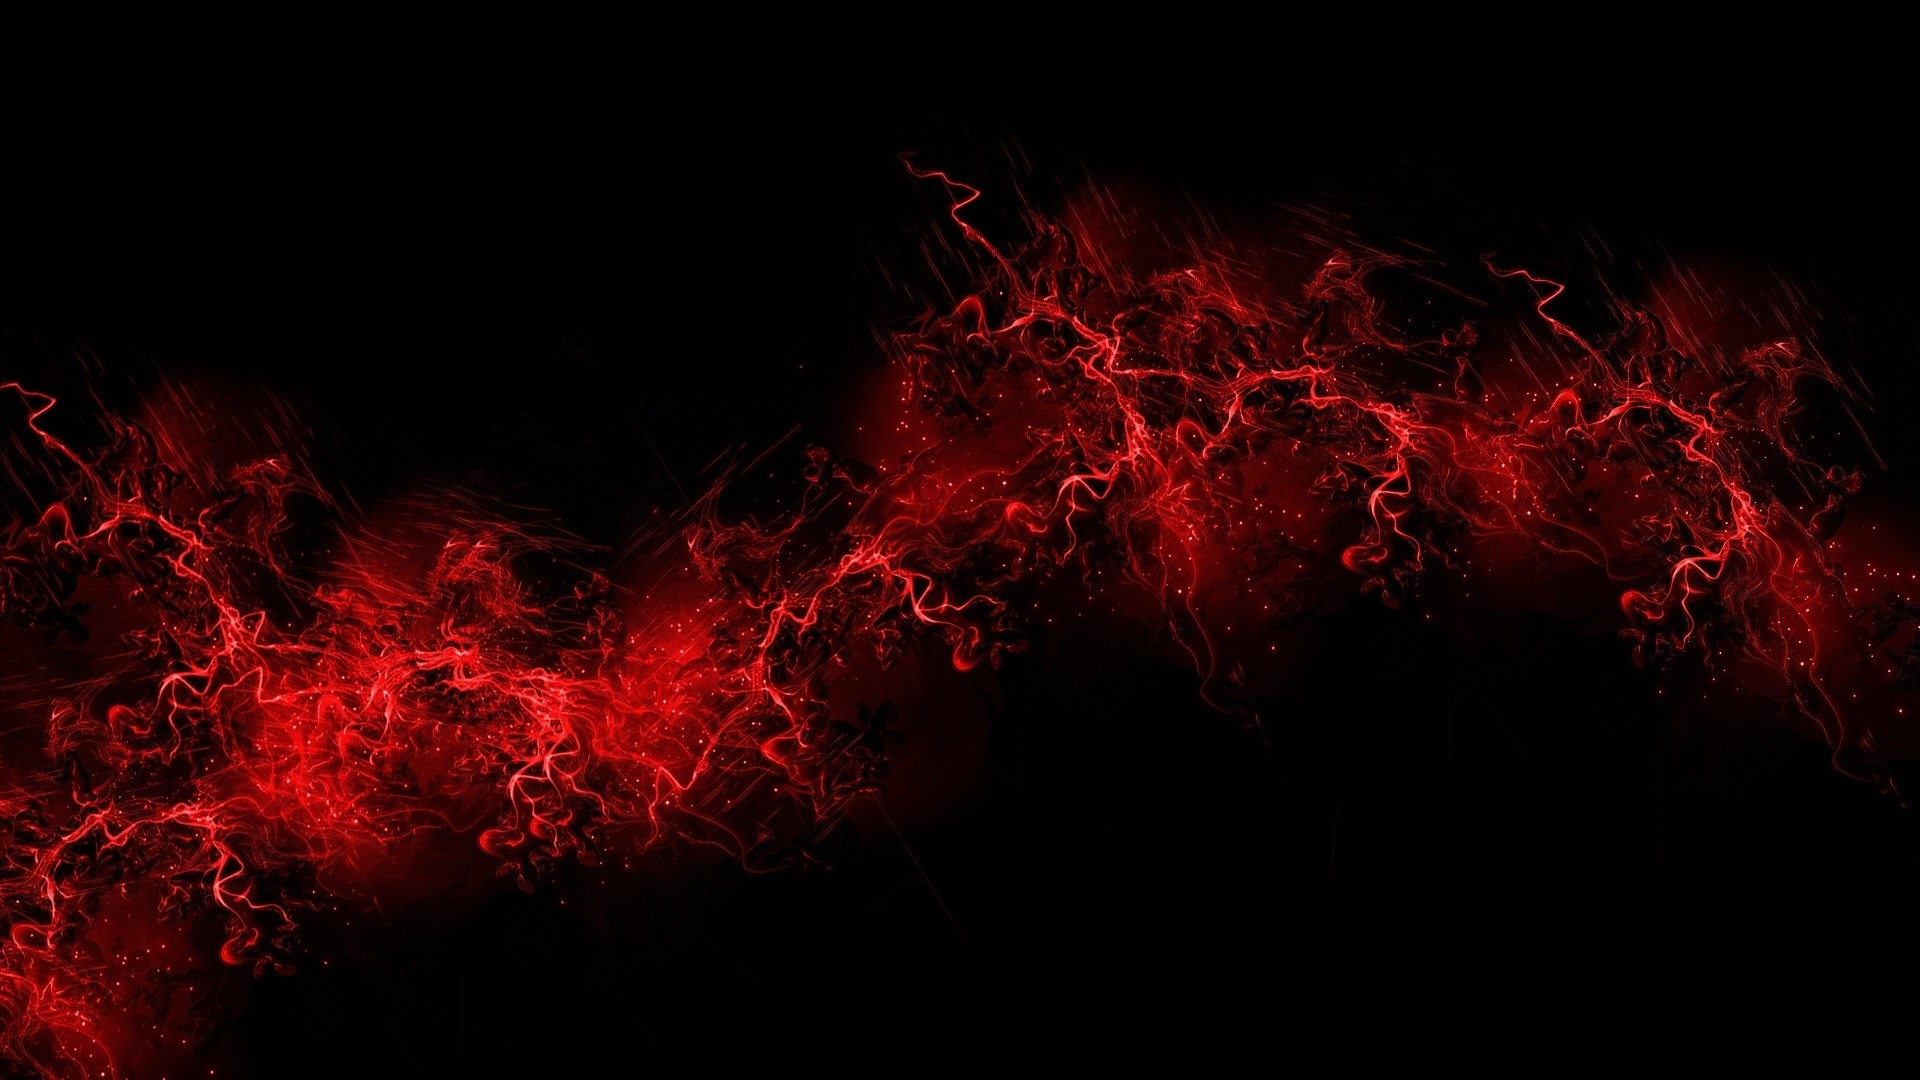 1920x1080 10 Top And Newest 1920X1080 Red And Black Wallpaper for Desktop Computer  with FULL HD 1080p (1920 Ã 1080) FREE DOWNLOAD